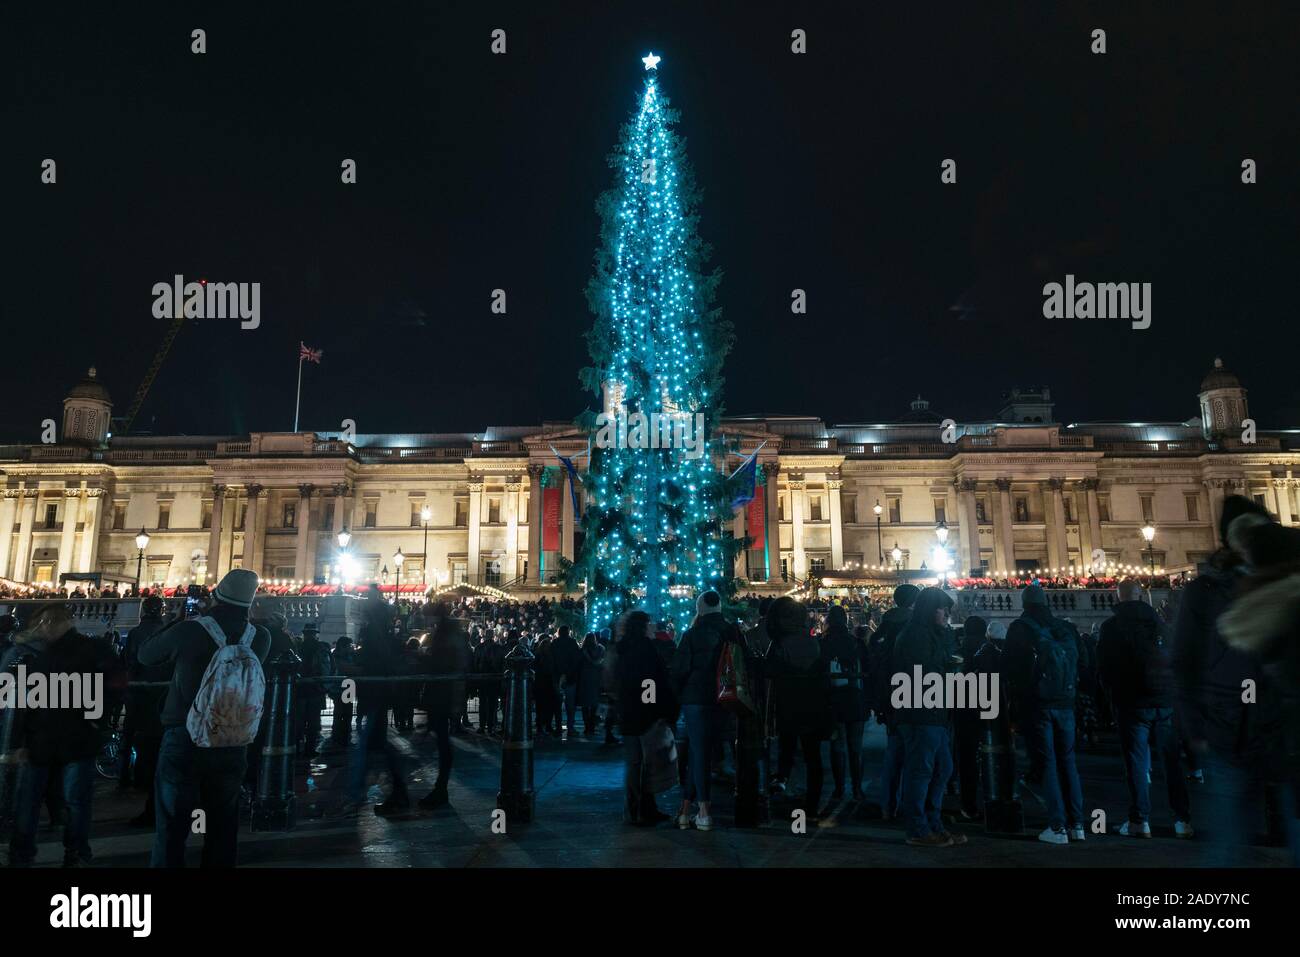 London, UK. 5 December 2019. The annual lighting of the Christmas Tree  takes place in Trafalgar Square. The tree, a Norwegian spruce, is donated  by the City of Oslo to the people